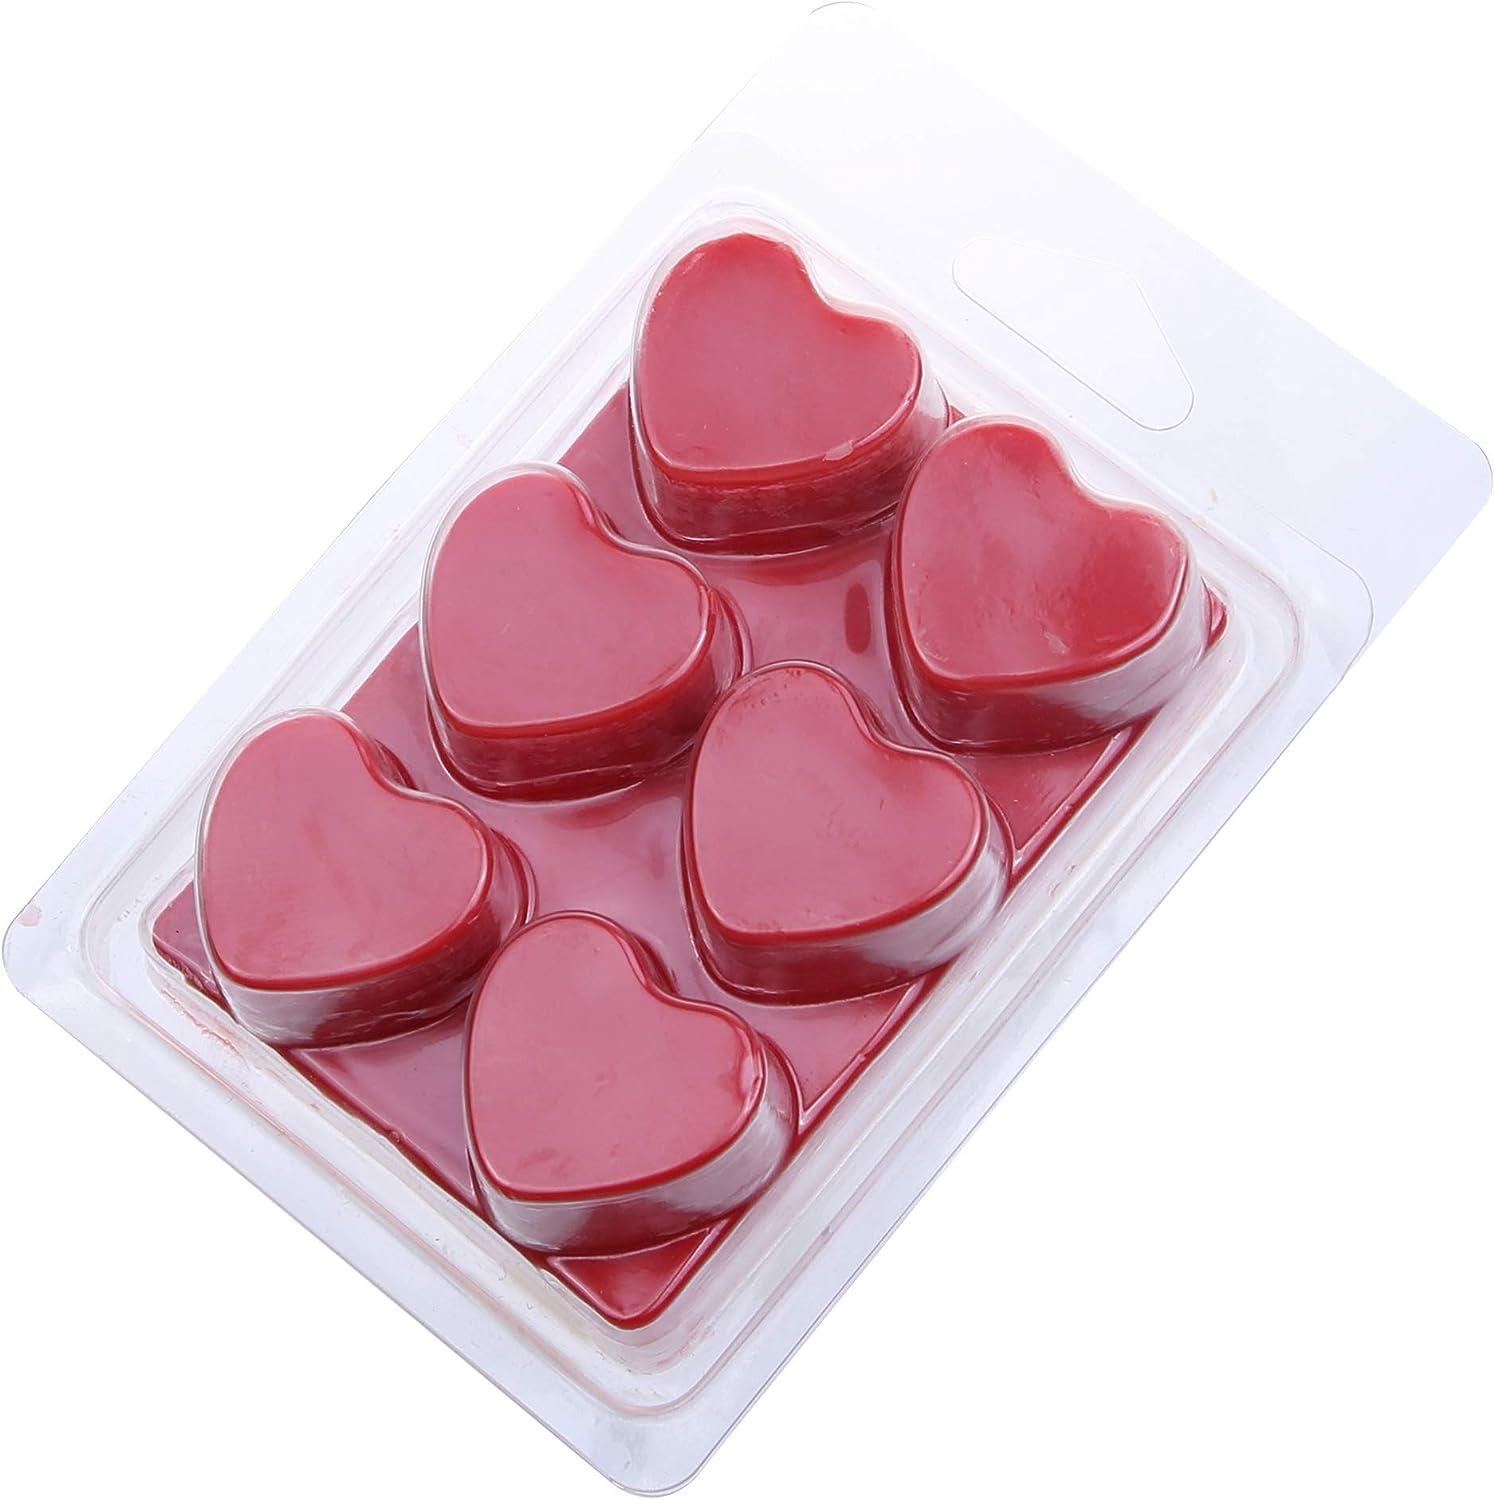 60 Pack Wax Melt Containers-6 Cavity Clear Empty Plastic Wax Melt Molds -  Clamshells For Tarts Wax Melts.